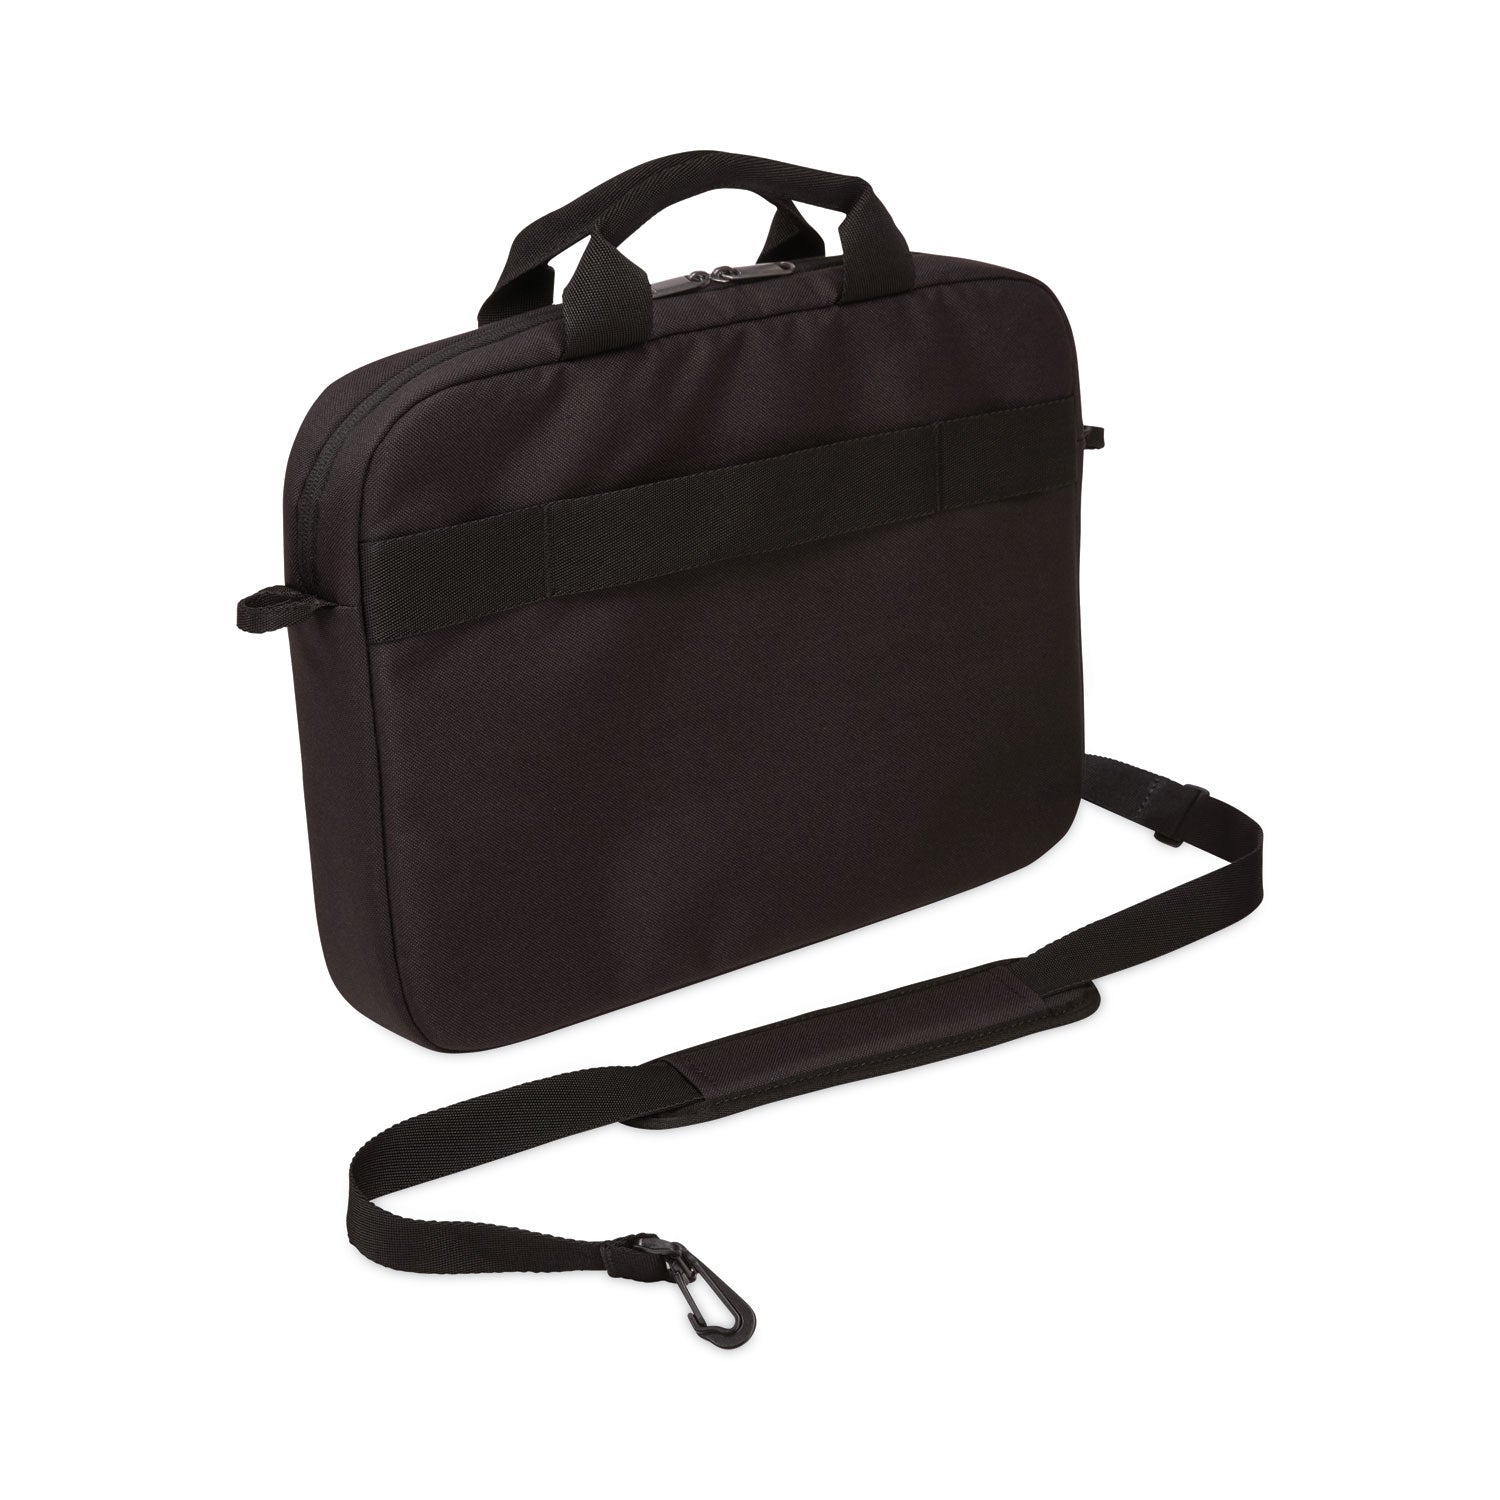 advantage-laptop-attache-fits-devices-up-to-156-polyester-161-x-28-x-138-black_clg3203988 - 3